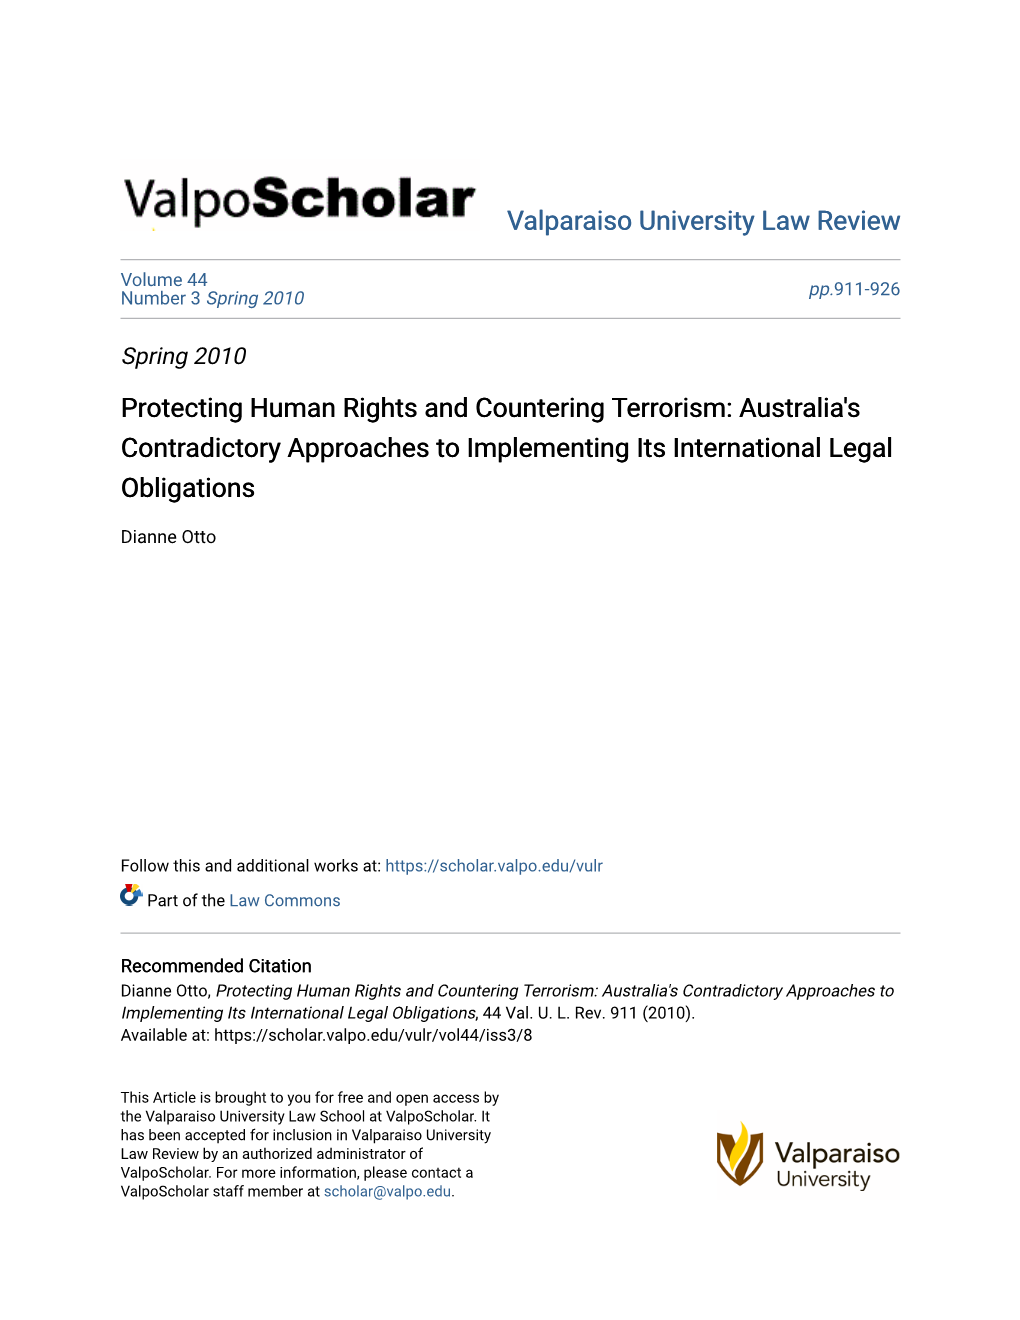 Protecting Human Rights and Countering Terrorism: Australia's Contradictory Approaches to Implementing Its International Legal Obligations